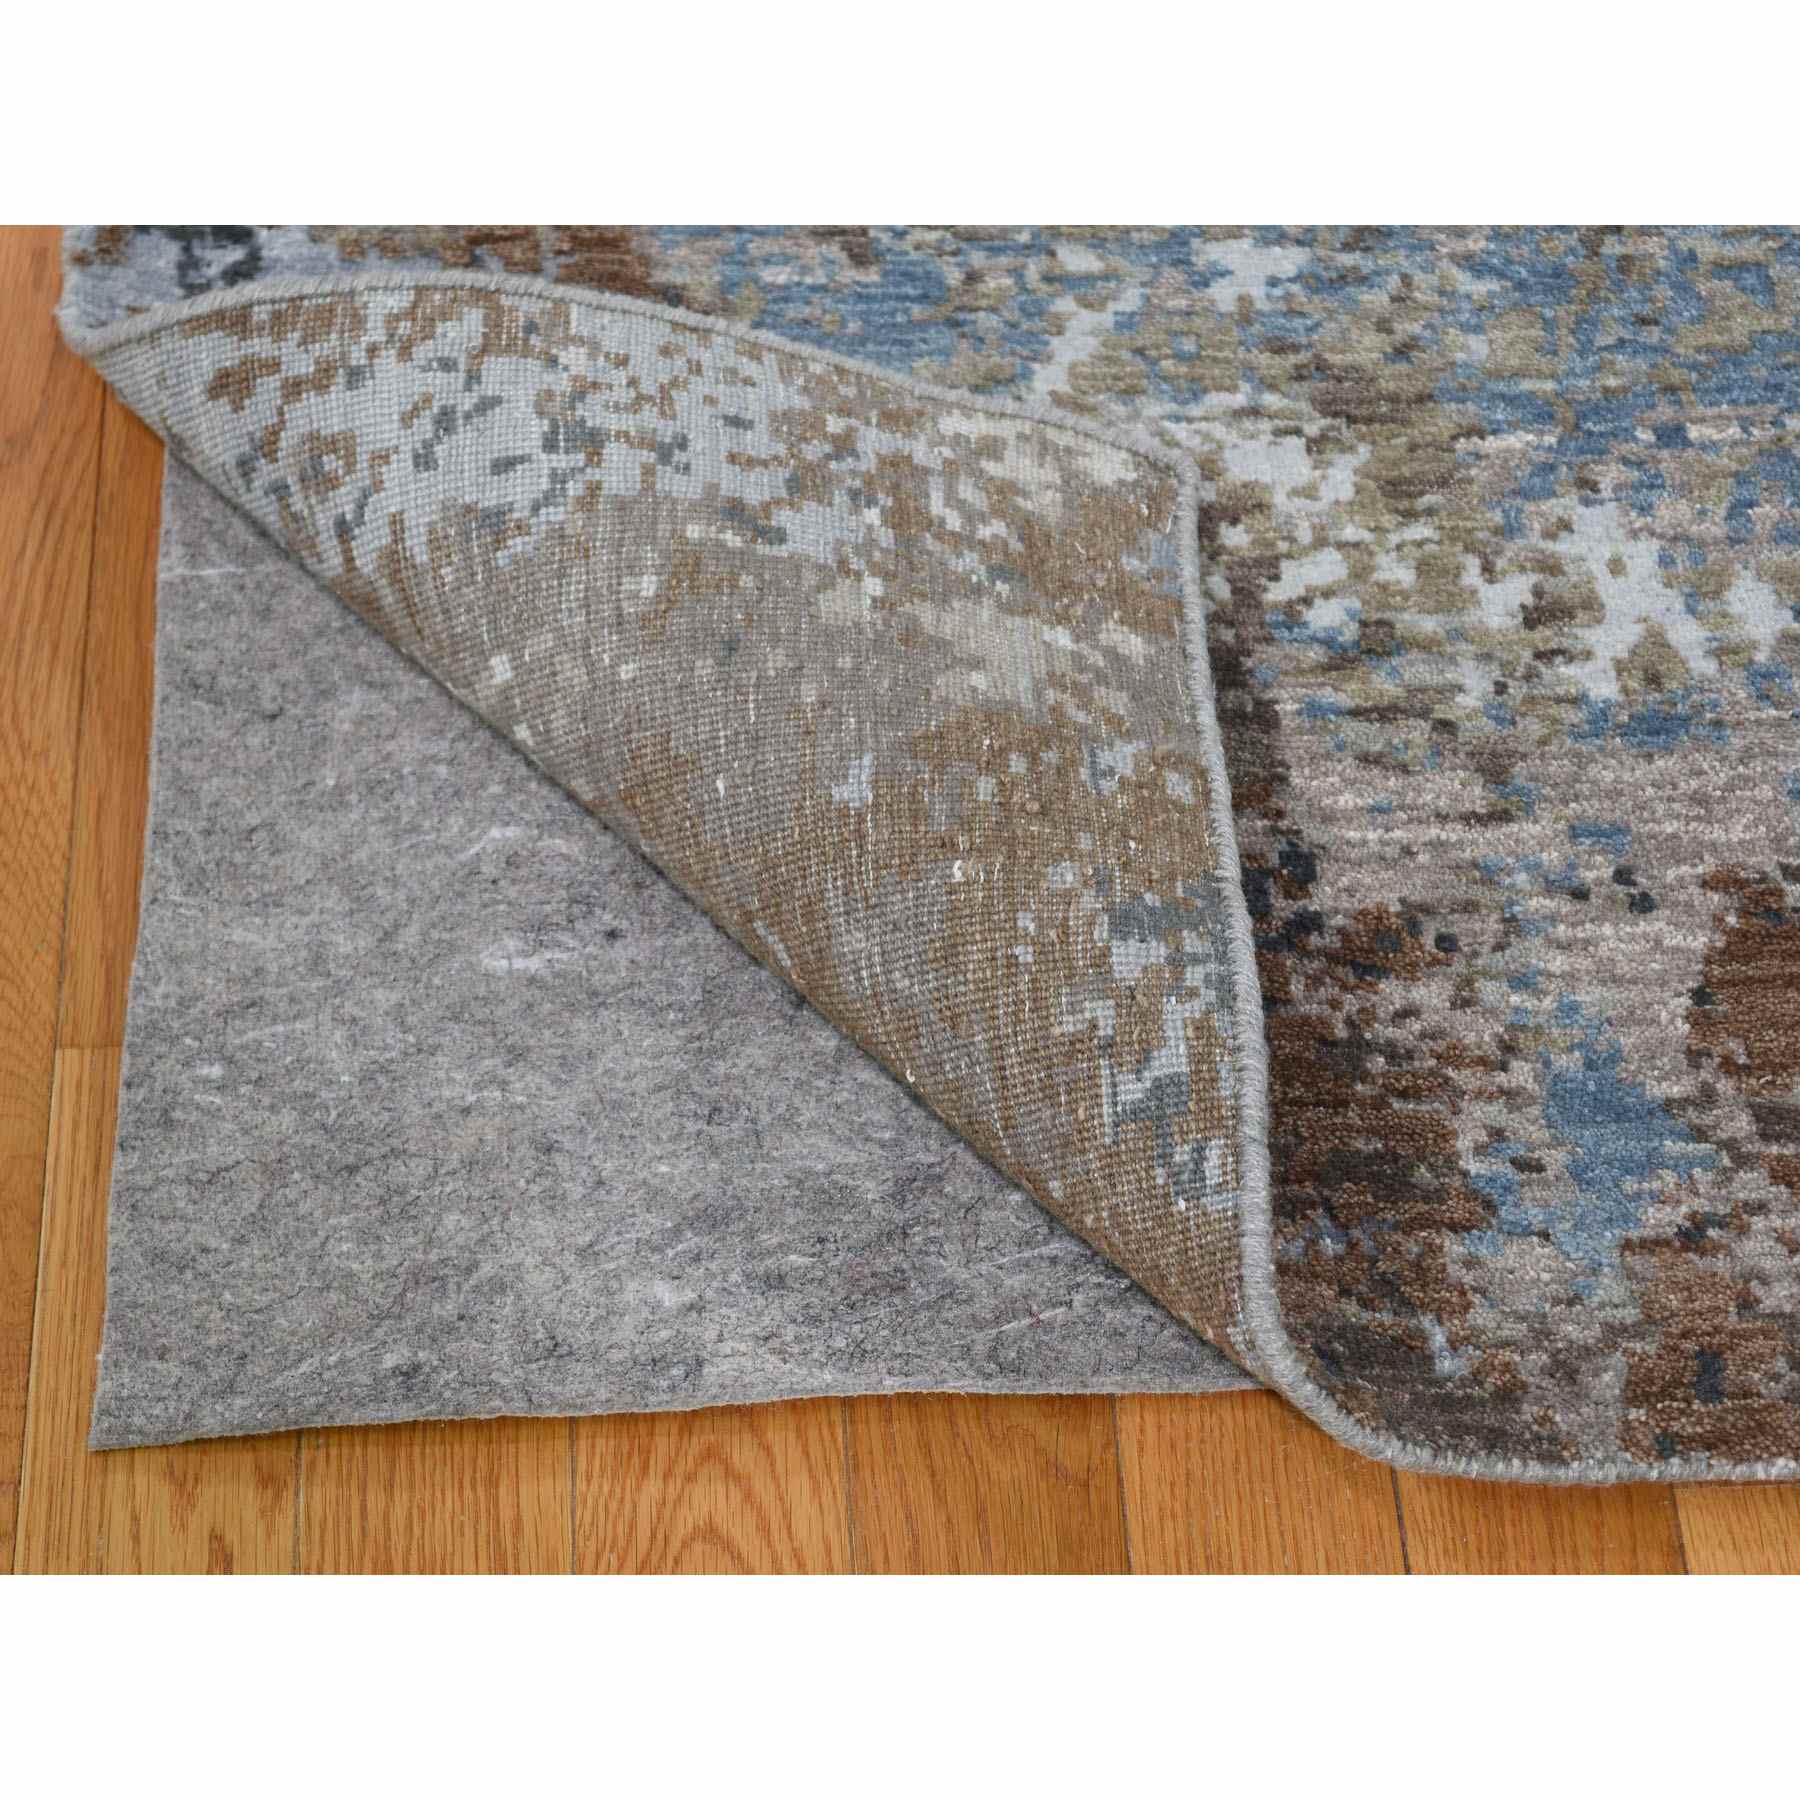 7-10 x10- Blue Abstract Design Wool and Silk Hi-Low Pile Denser Weave Hand Knotted Oriental Rug 